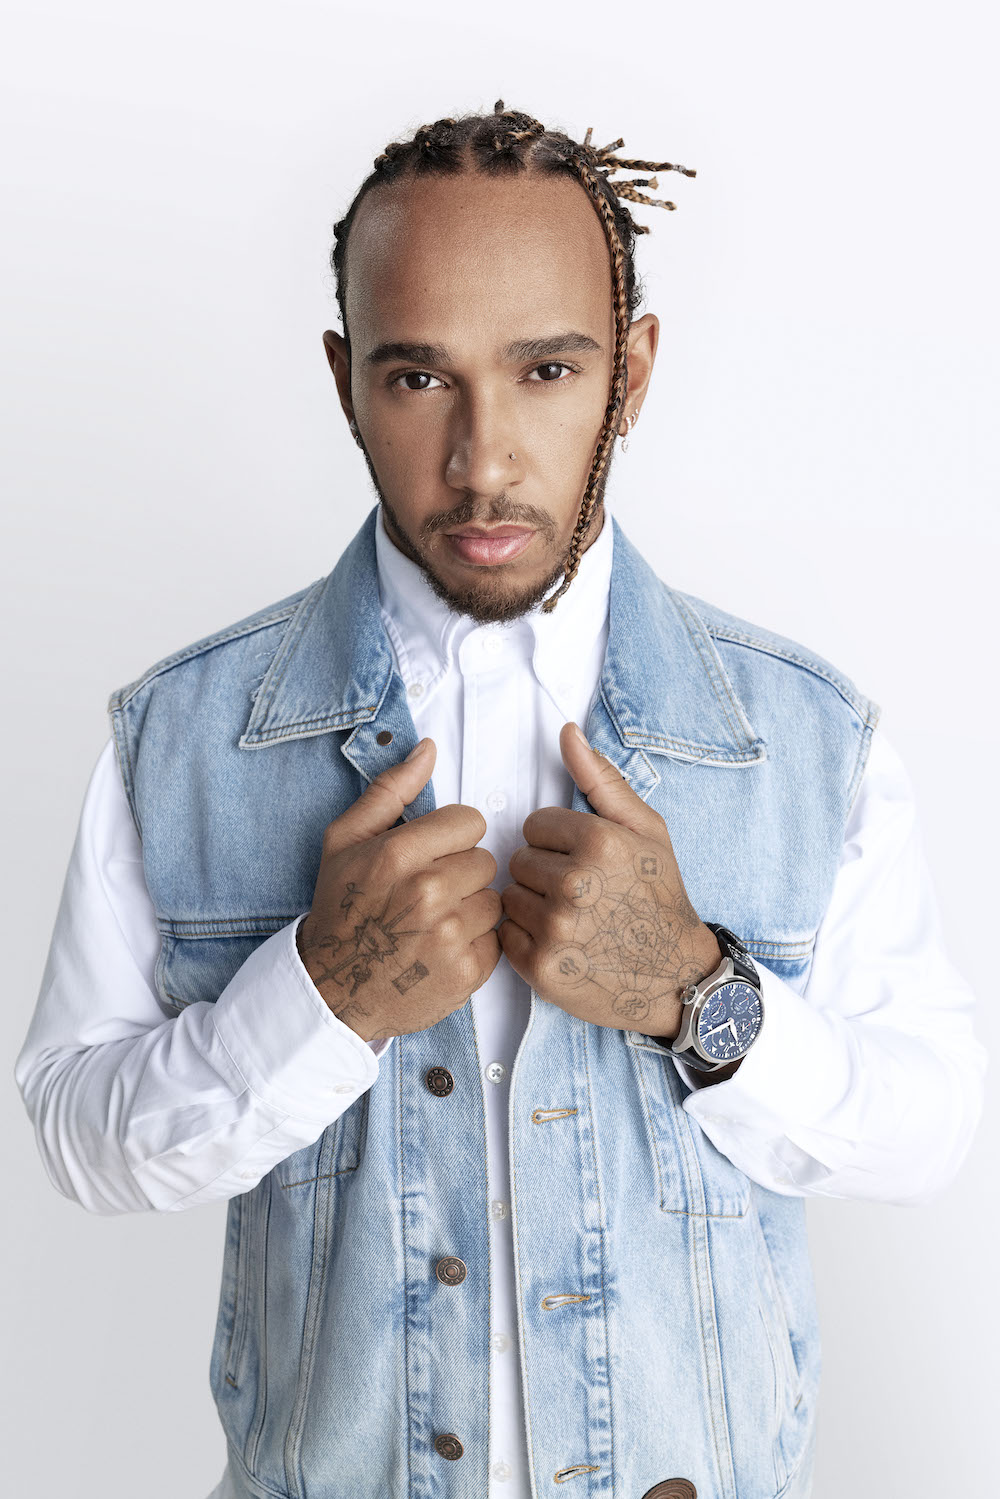 Lewis Hamilton And IWC Team Up For Big Pilot’s Watch Campaign